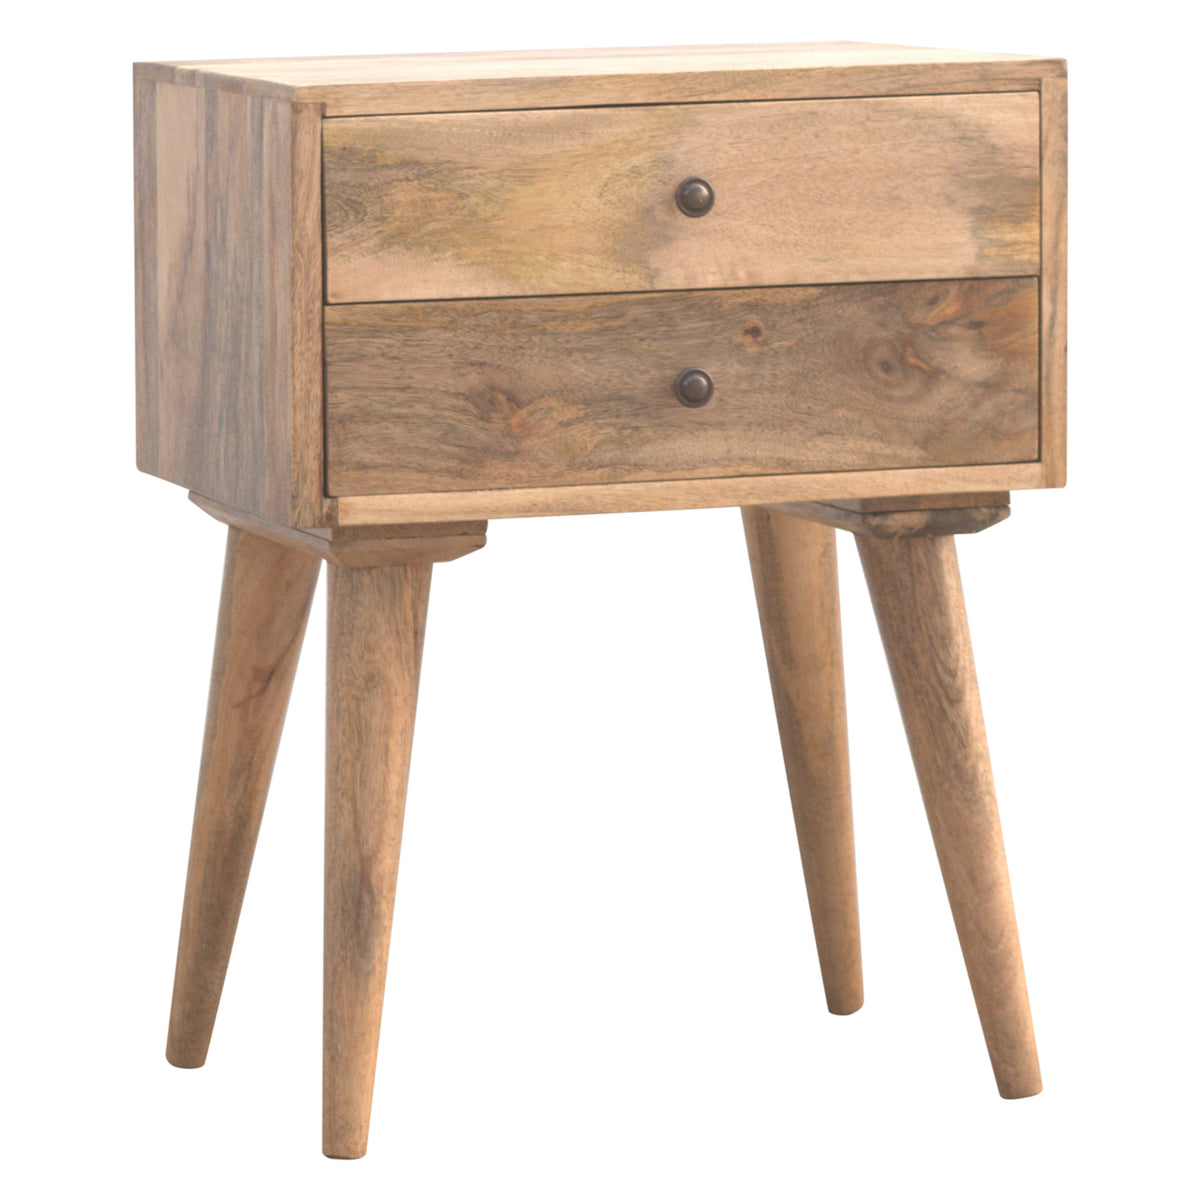 Solid Wood Bedside Table buy now pay later klarna